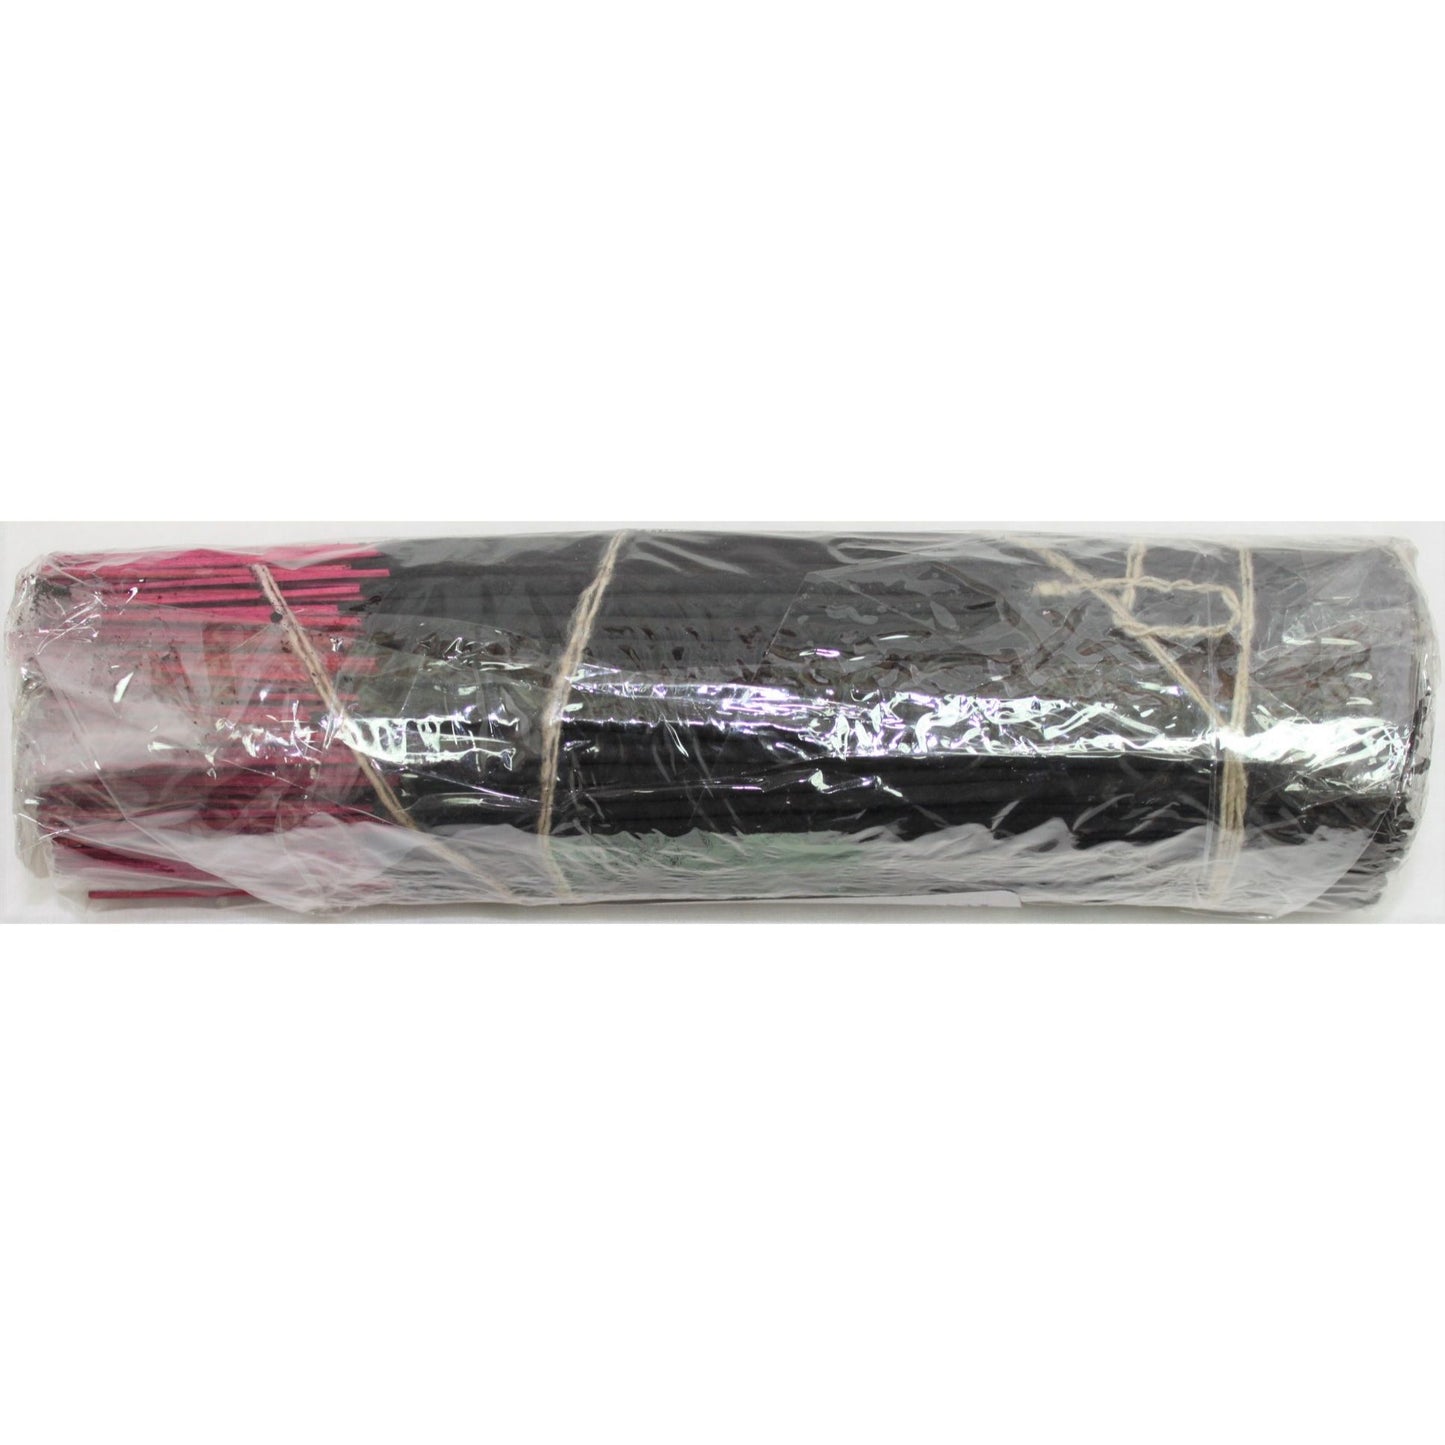 Incense From India - Devi's Passion